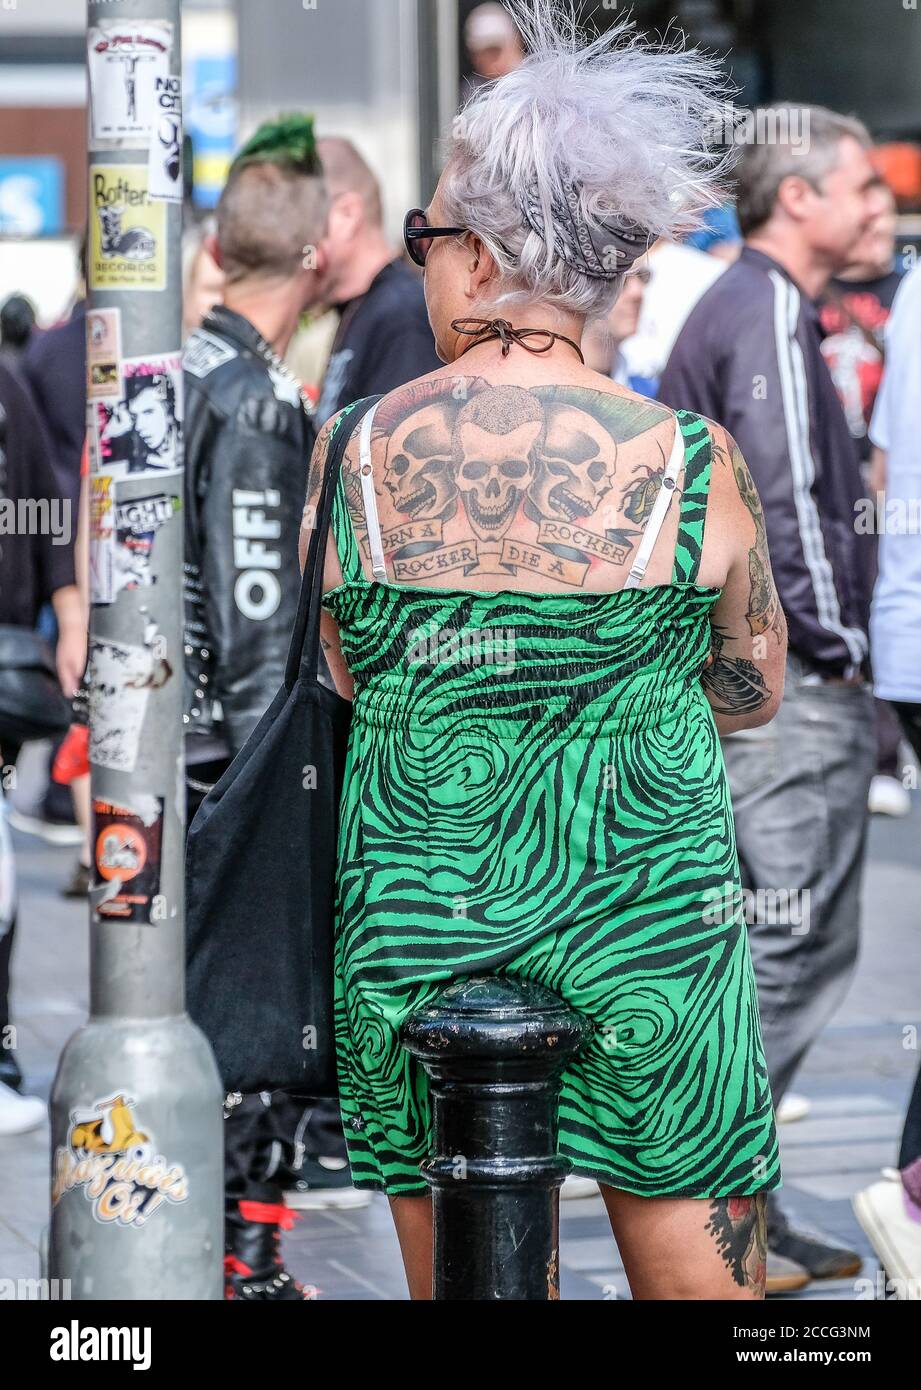 punk woman sitting on low post with bright green dress and vivid tattoos on her back Stock Photo